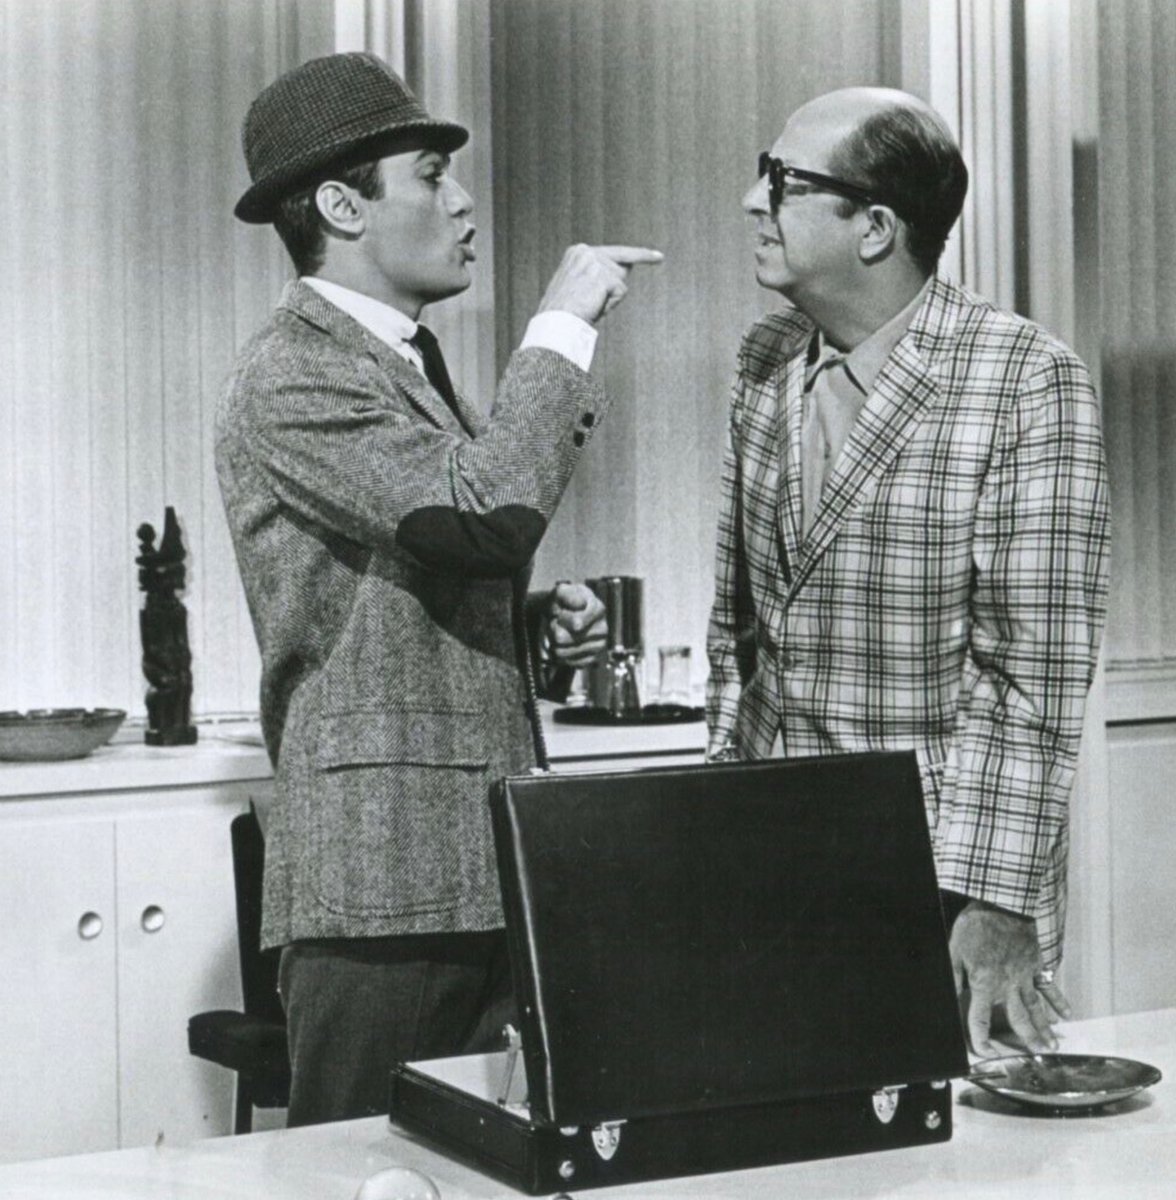 Phil Silvers, born this day in 1911, was a great American entertainer and comedian that captured the hearts of millions with his impeccable timing and wit. Here he's in the film 40 Pounds of Trouble, where we met. Happy birthday, Phil! #PhilSilvers #SgtBilko #ComedyLegend